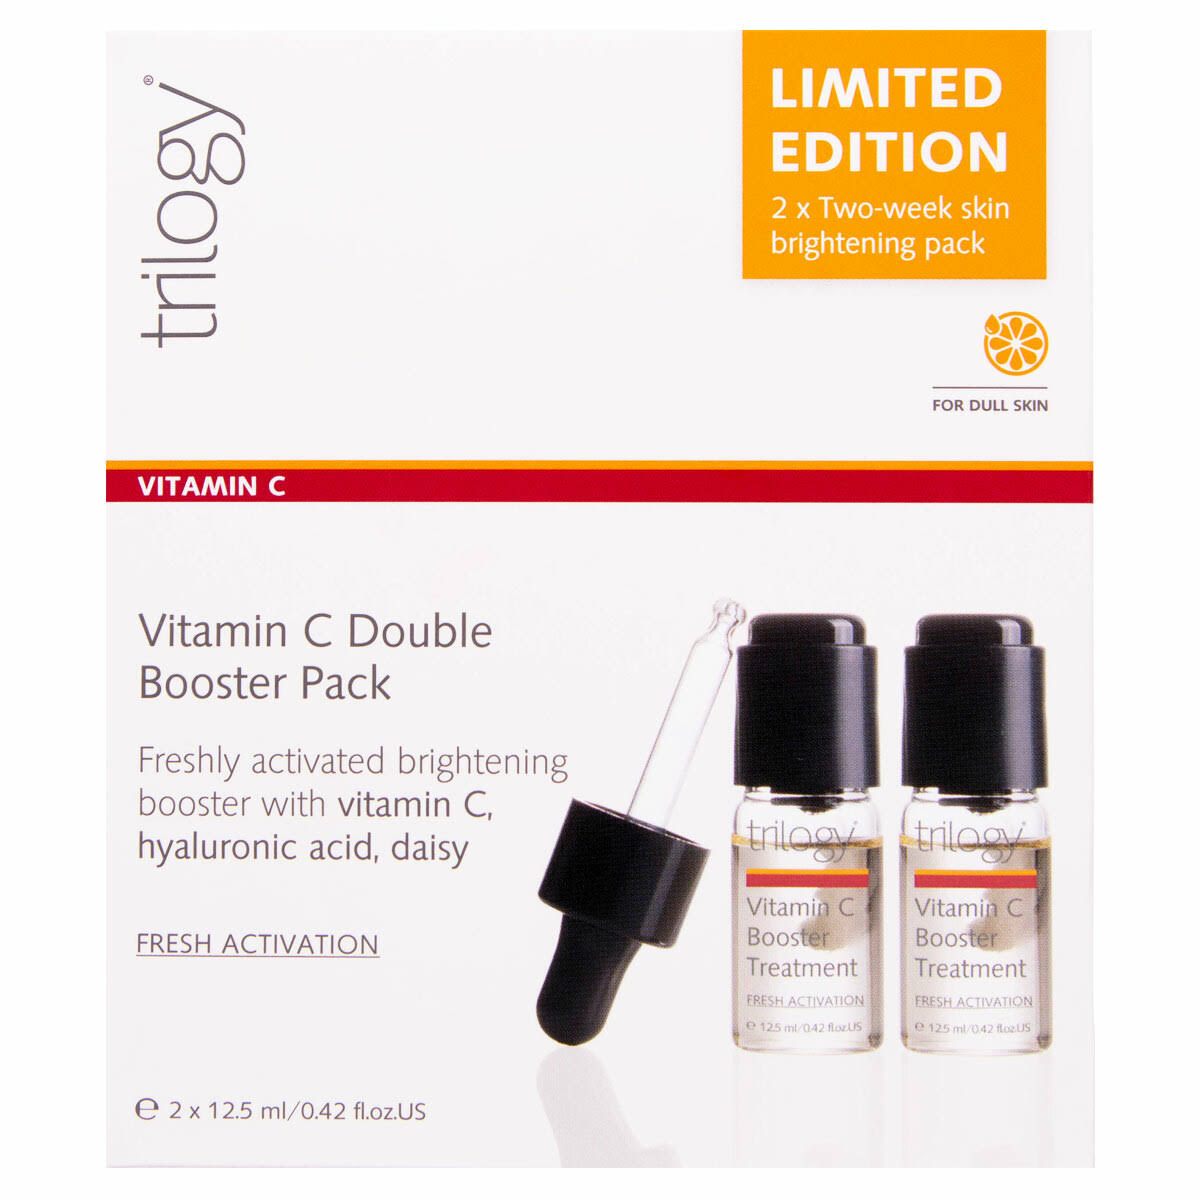 Trilogy Vitamin C Double Booster Pack